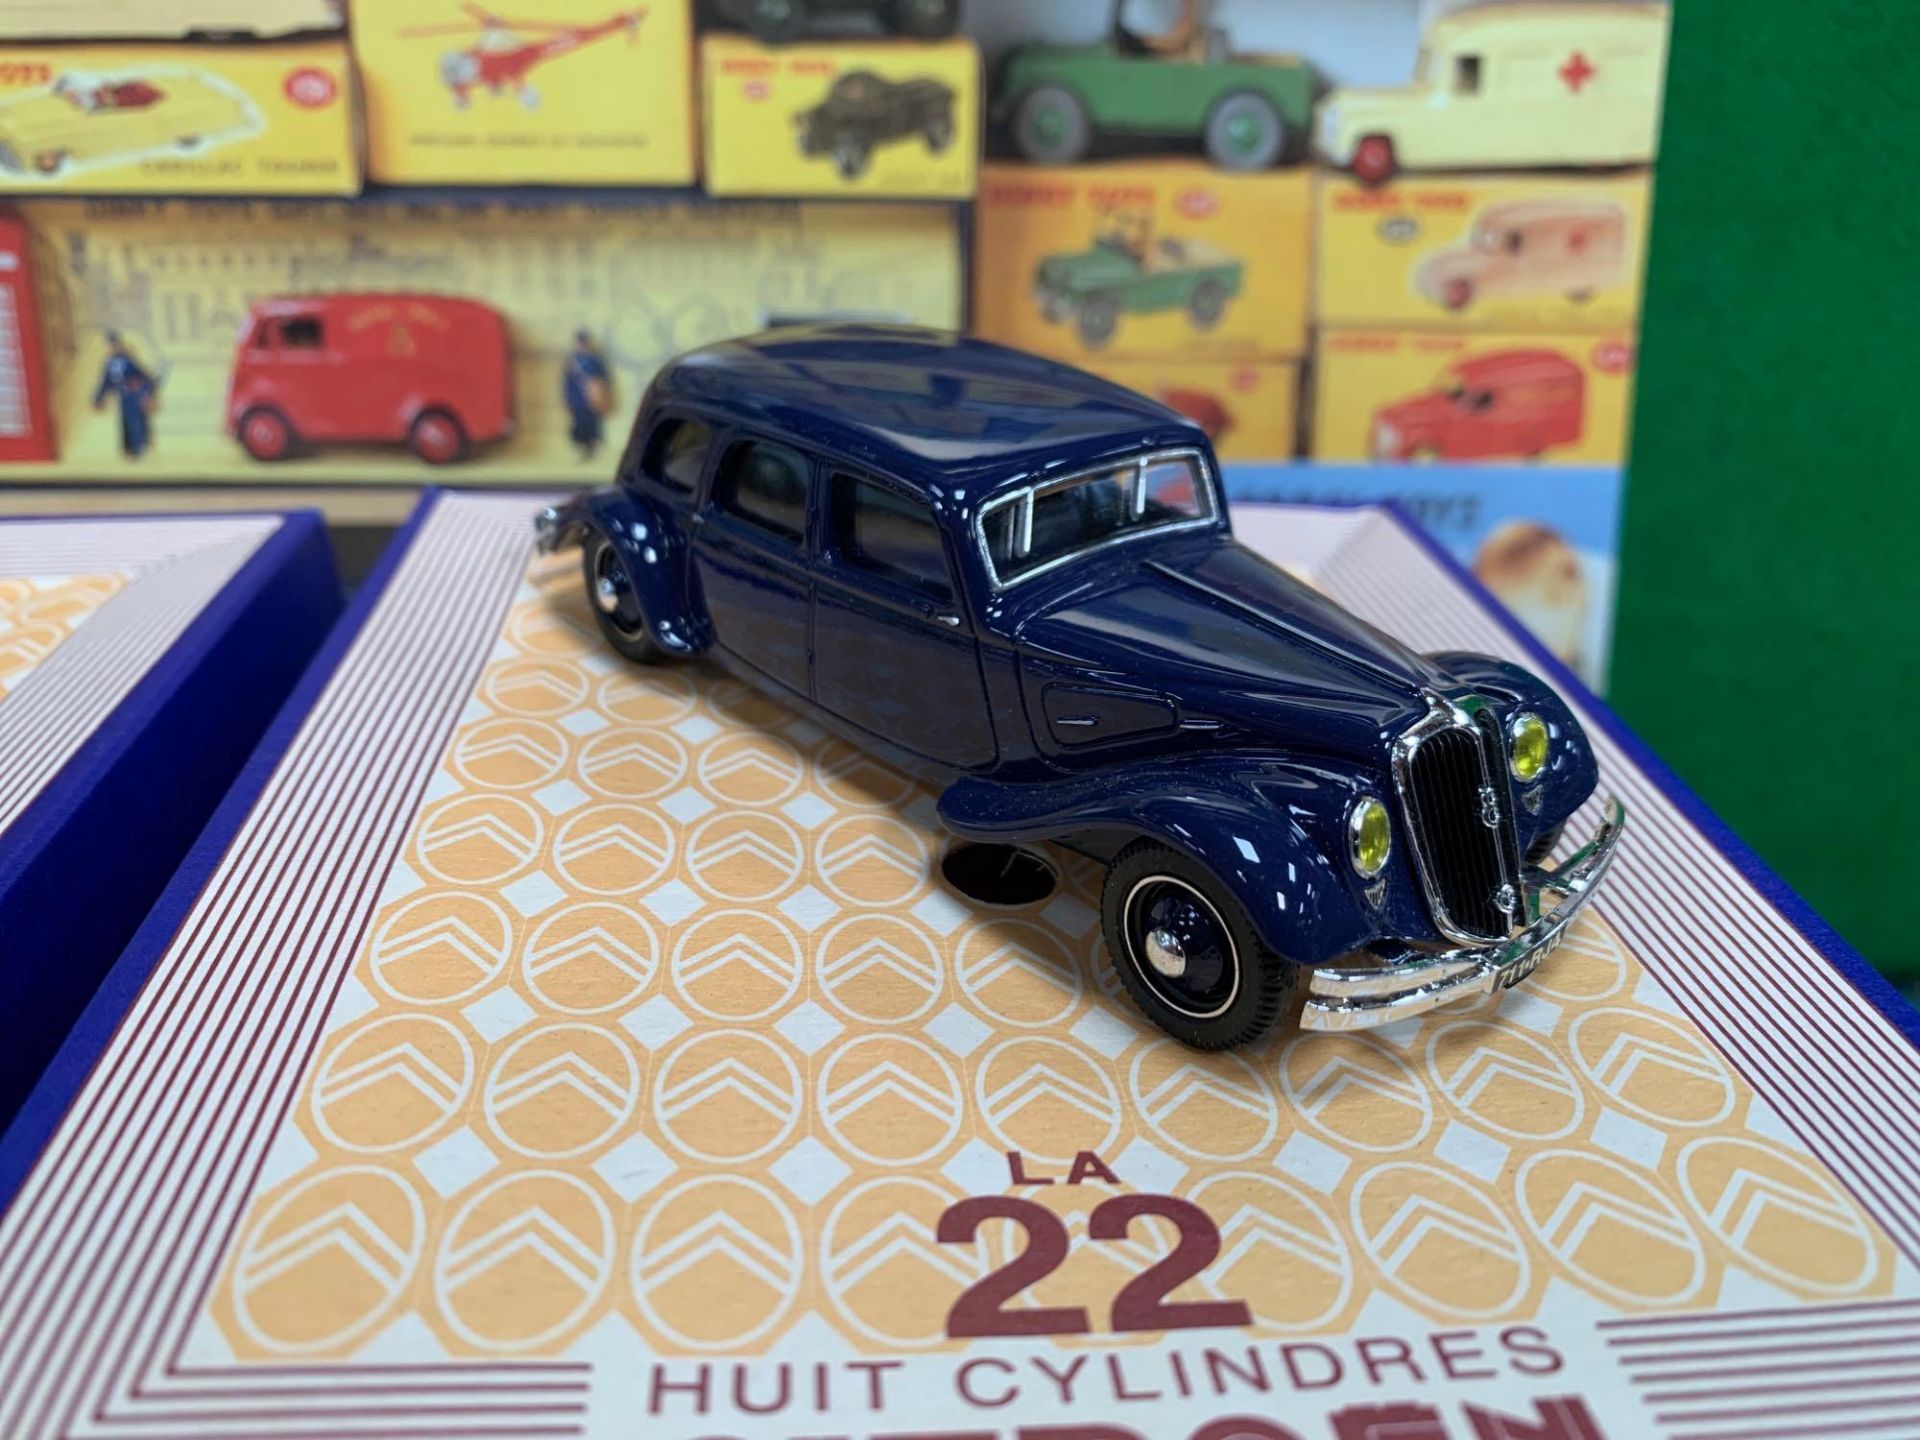 2 X Norev Diecasts. Citroen - Traction Avant 22CV Familiare 1934 Limousine In Navy Blue And - Image 3 of 9